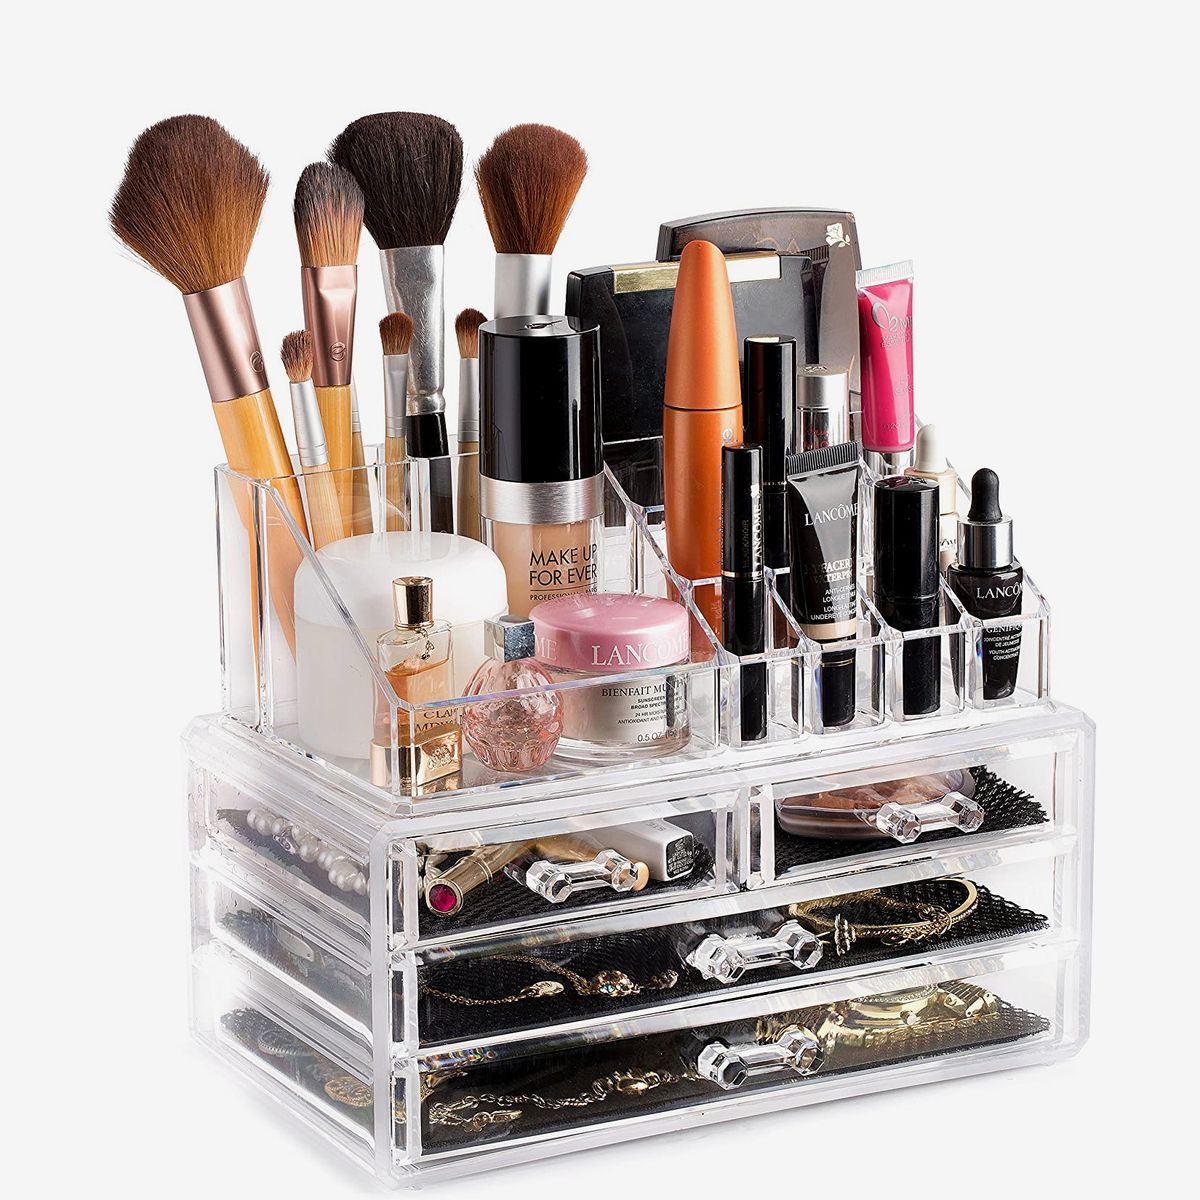 2 Pcs Makeup Brush Storage Organizer Tray Stand for Bathroom Vanity Counter 